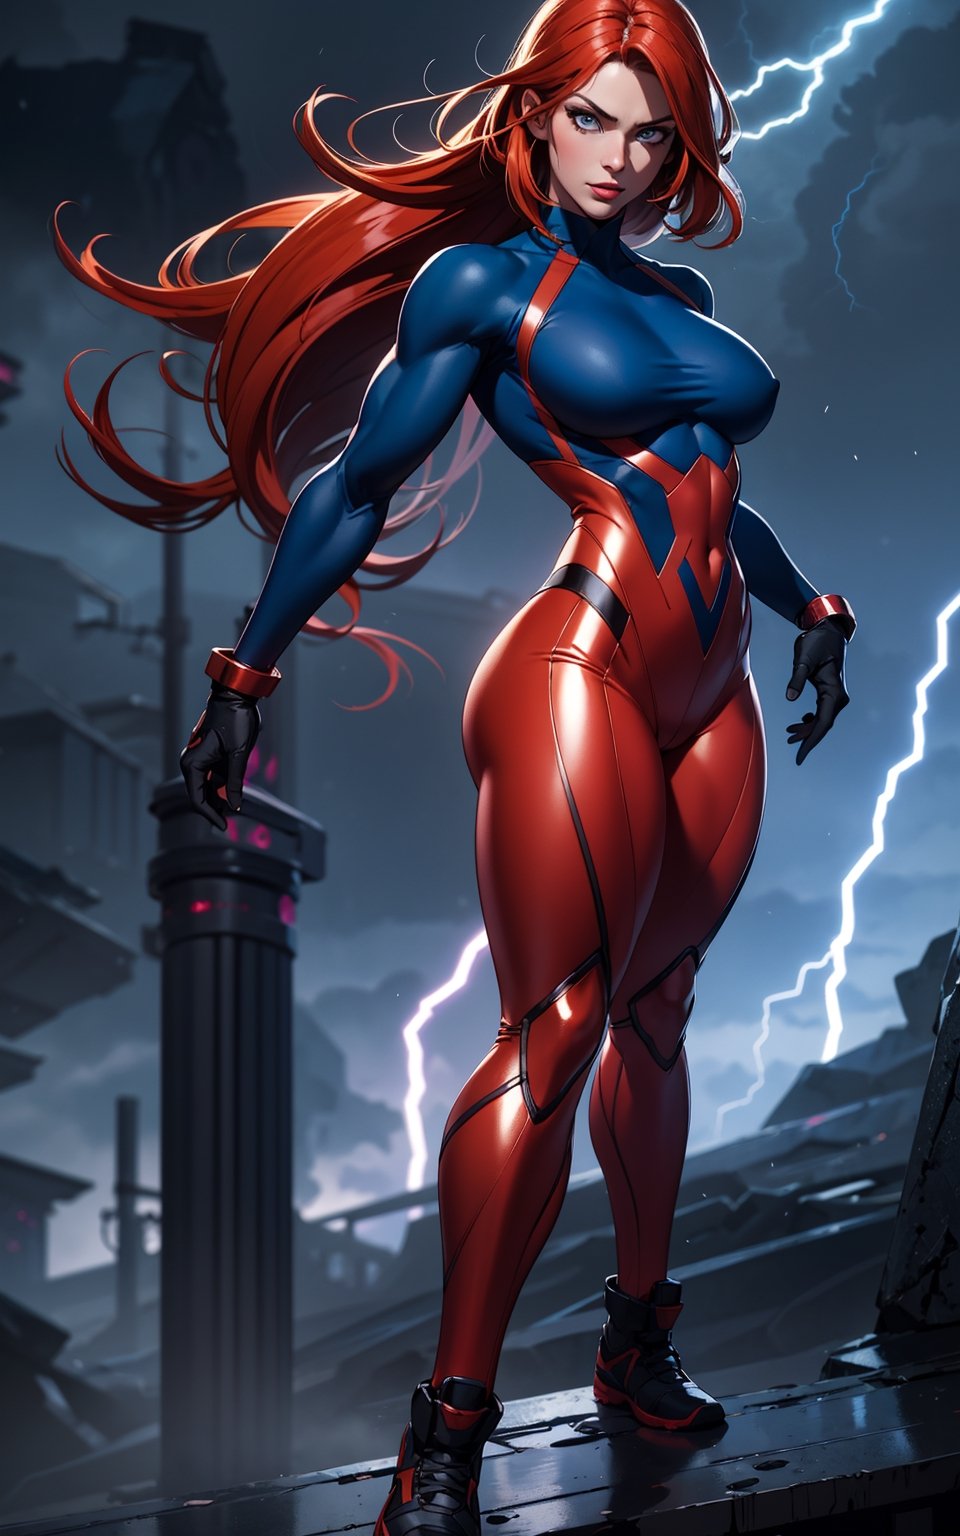 masterpiece,  best quality,  Very muscular woman
outdoors,  A very muscular woman, hands well shown,  standing, super-villain style, leggings, Dramatic lighting, Night time, Thunderstorm background, blue eyes, copper hair, High detailed full body, Head to feet